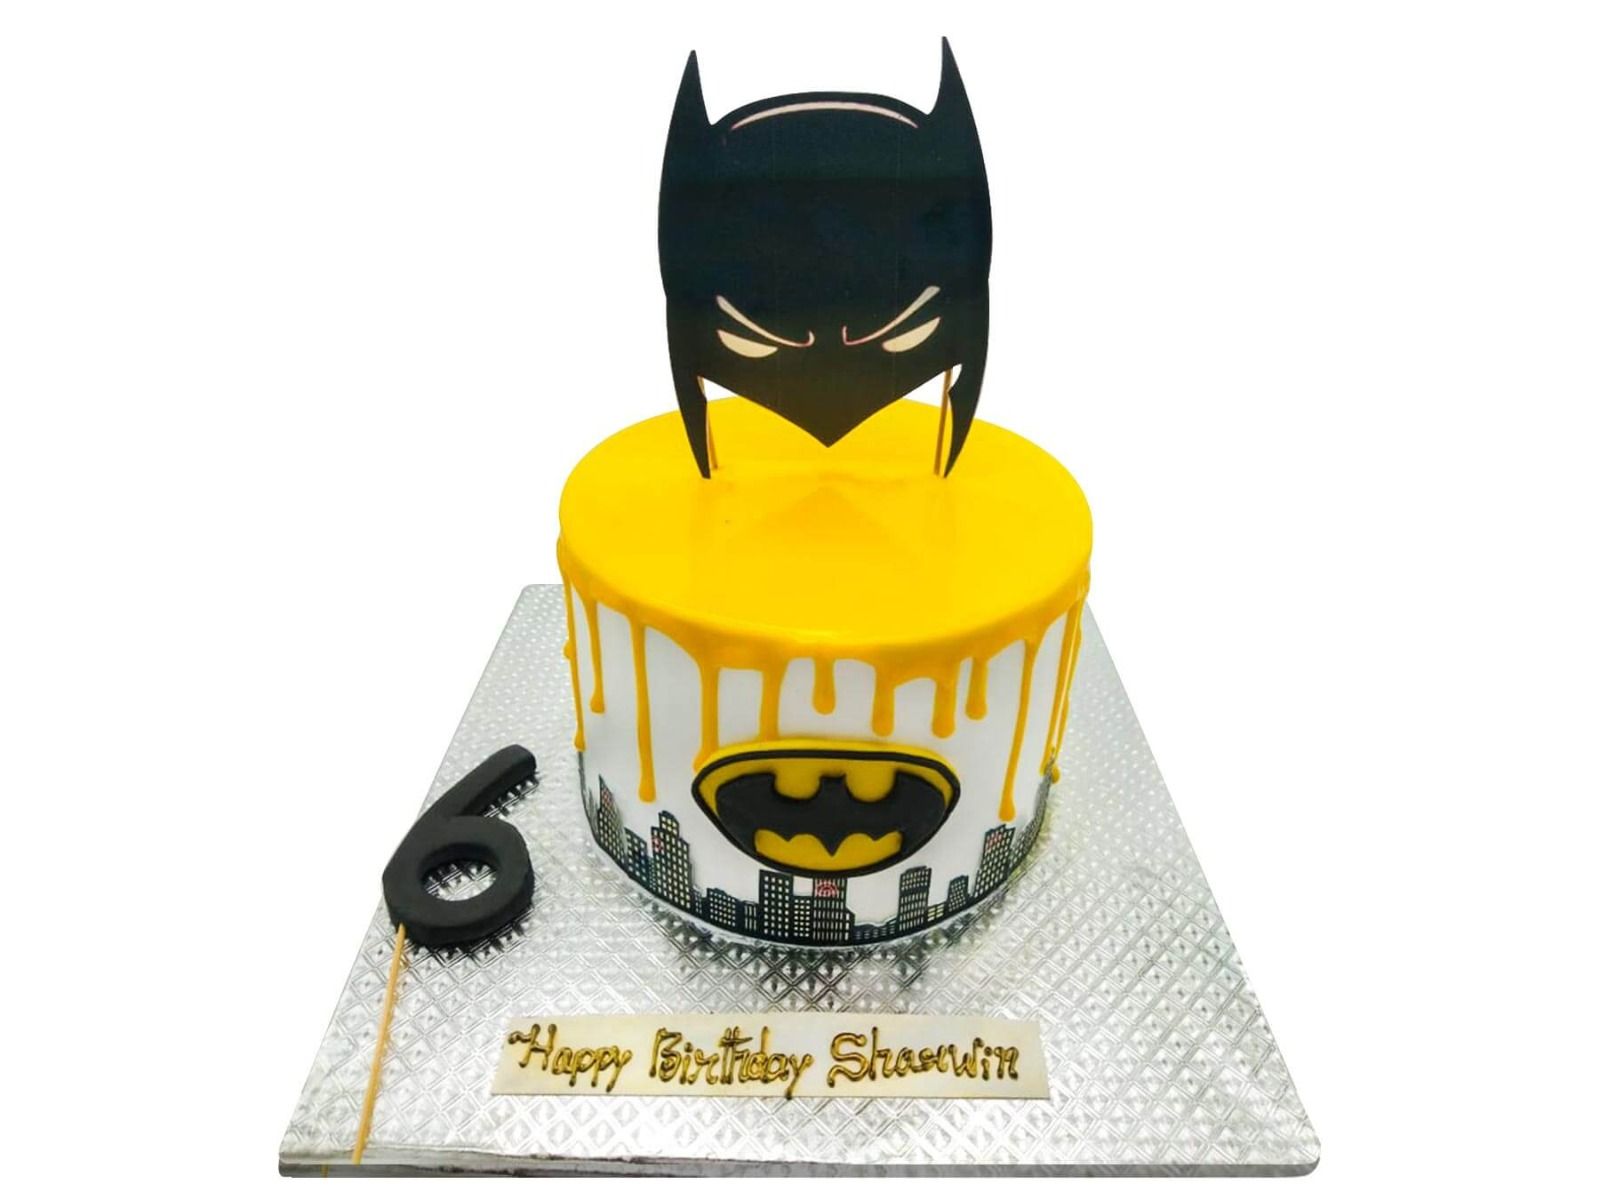 BATMAN BIRTHDAY PARTY PERSONALISED EDIBLE CAKE TOPPER & CUPCAKE TOPPERS  M-Z03 | eBay